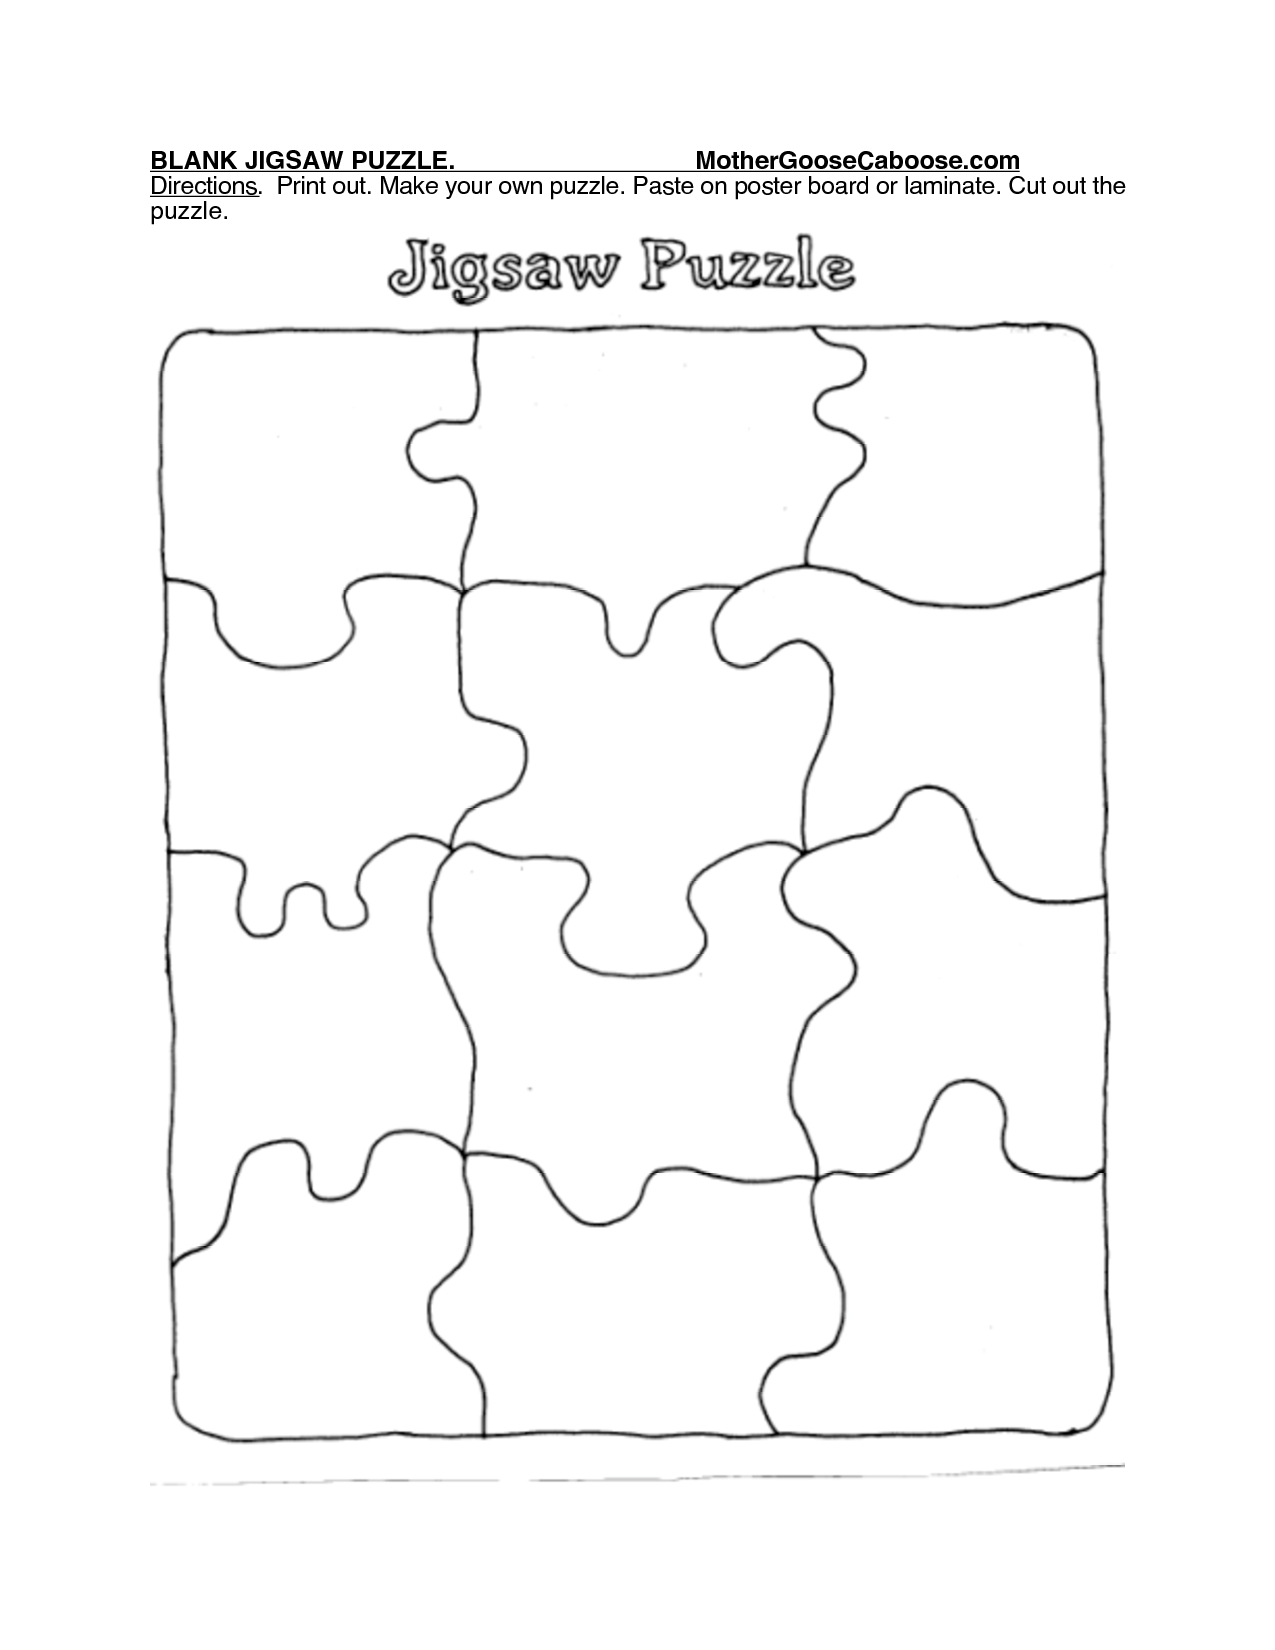 Blank Jigsaw Puzzle. Mothergoosecaboose Directions. Print Out - Print Your Puzzle